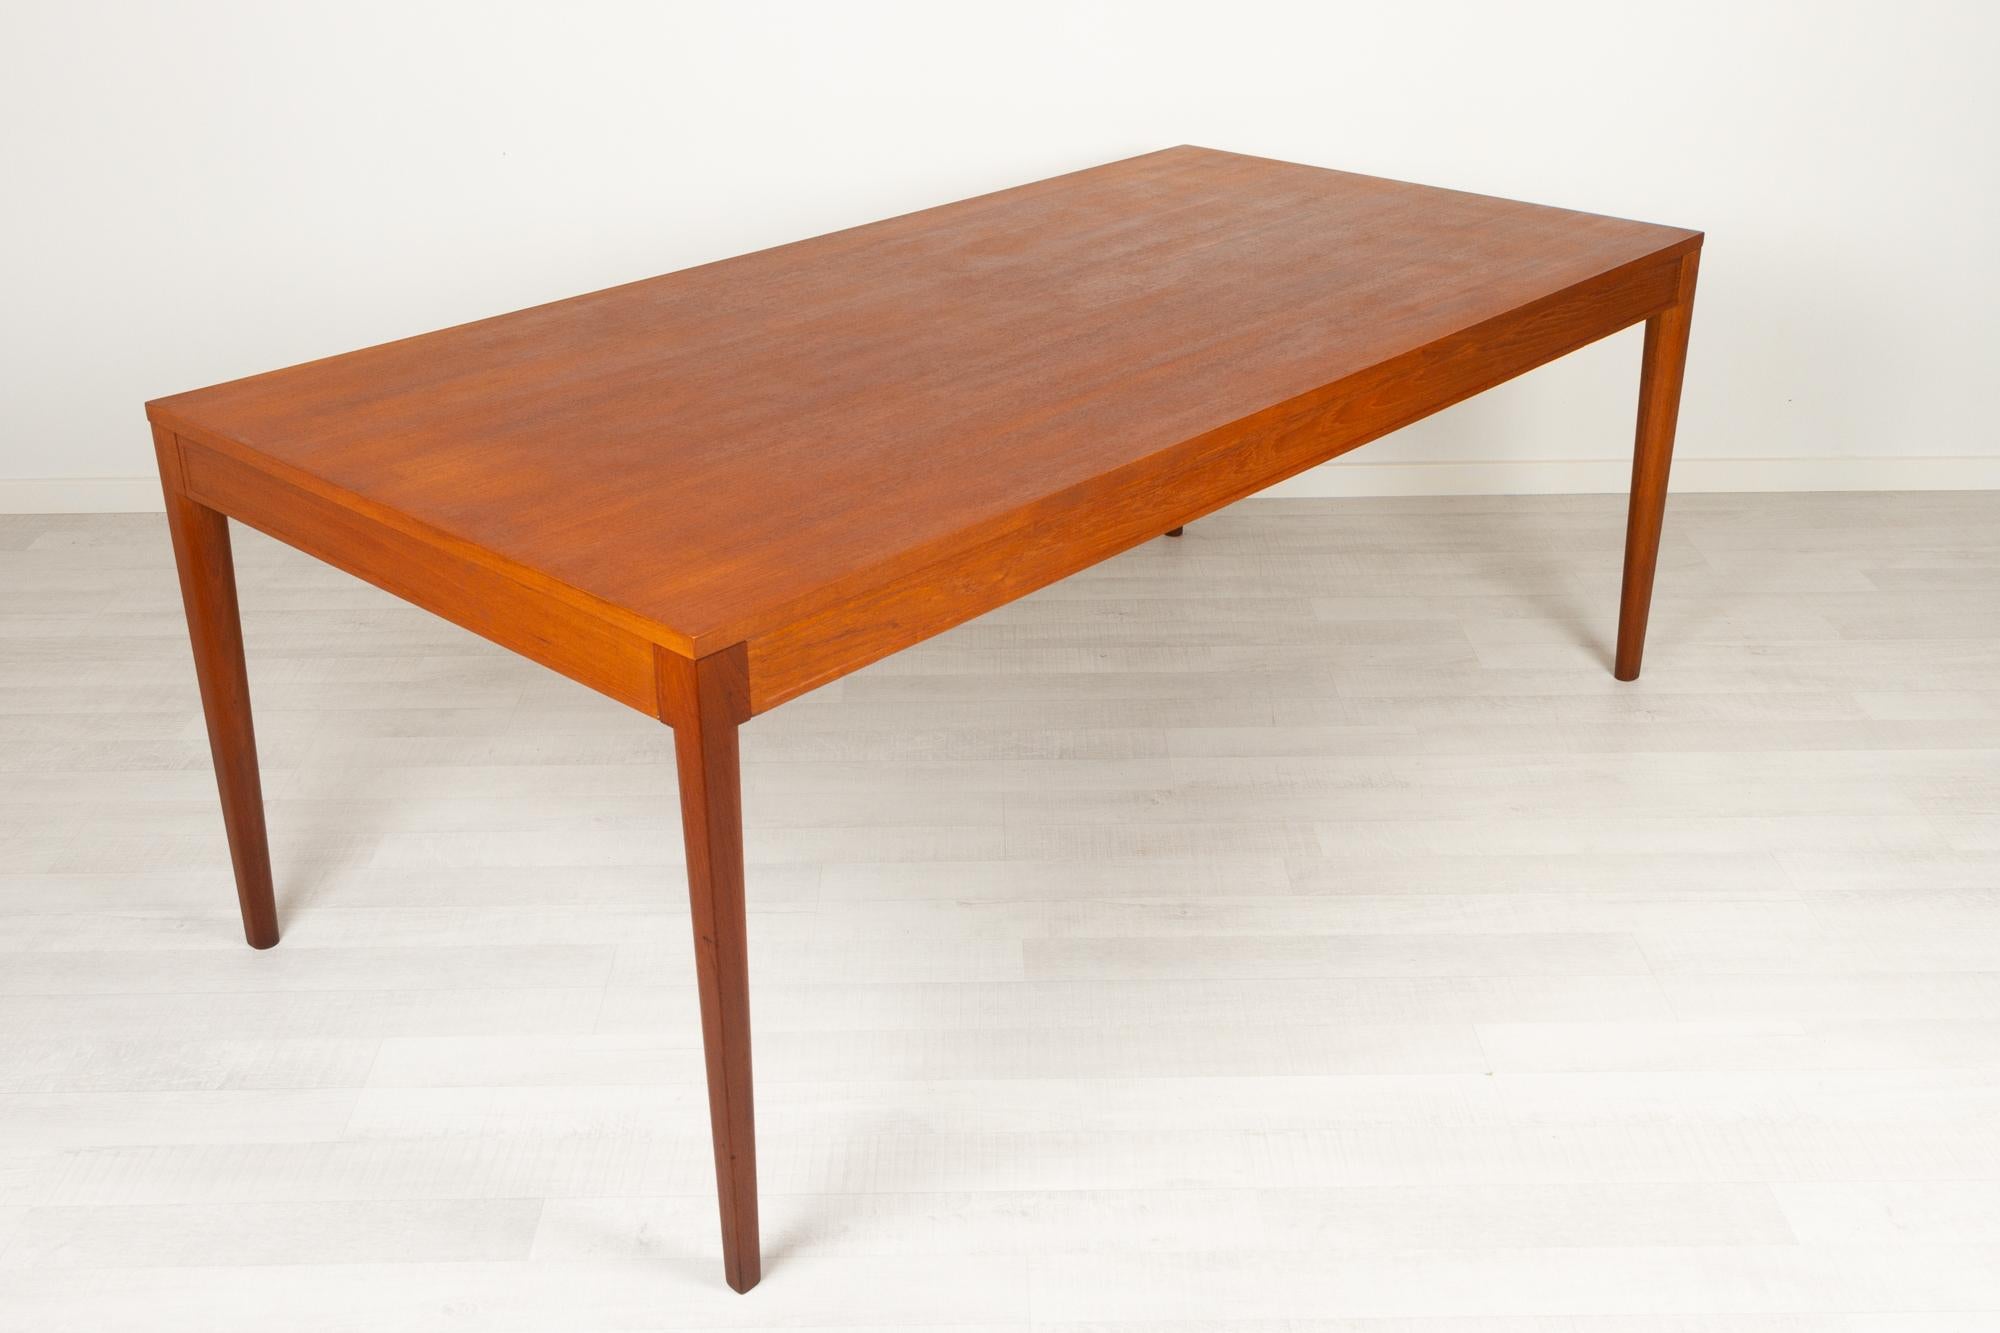 Vintage Danish Teak Dining Table by Finn Juhl for France & Søn, 1960s In Good Condition For Sale In Asaa, DK